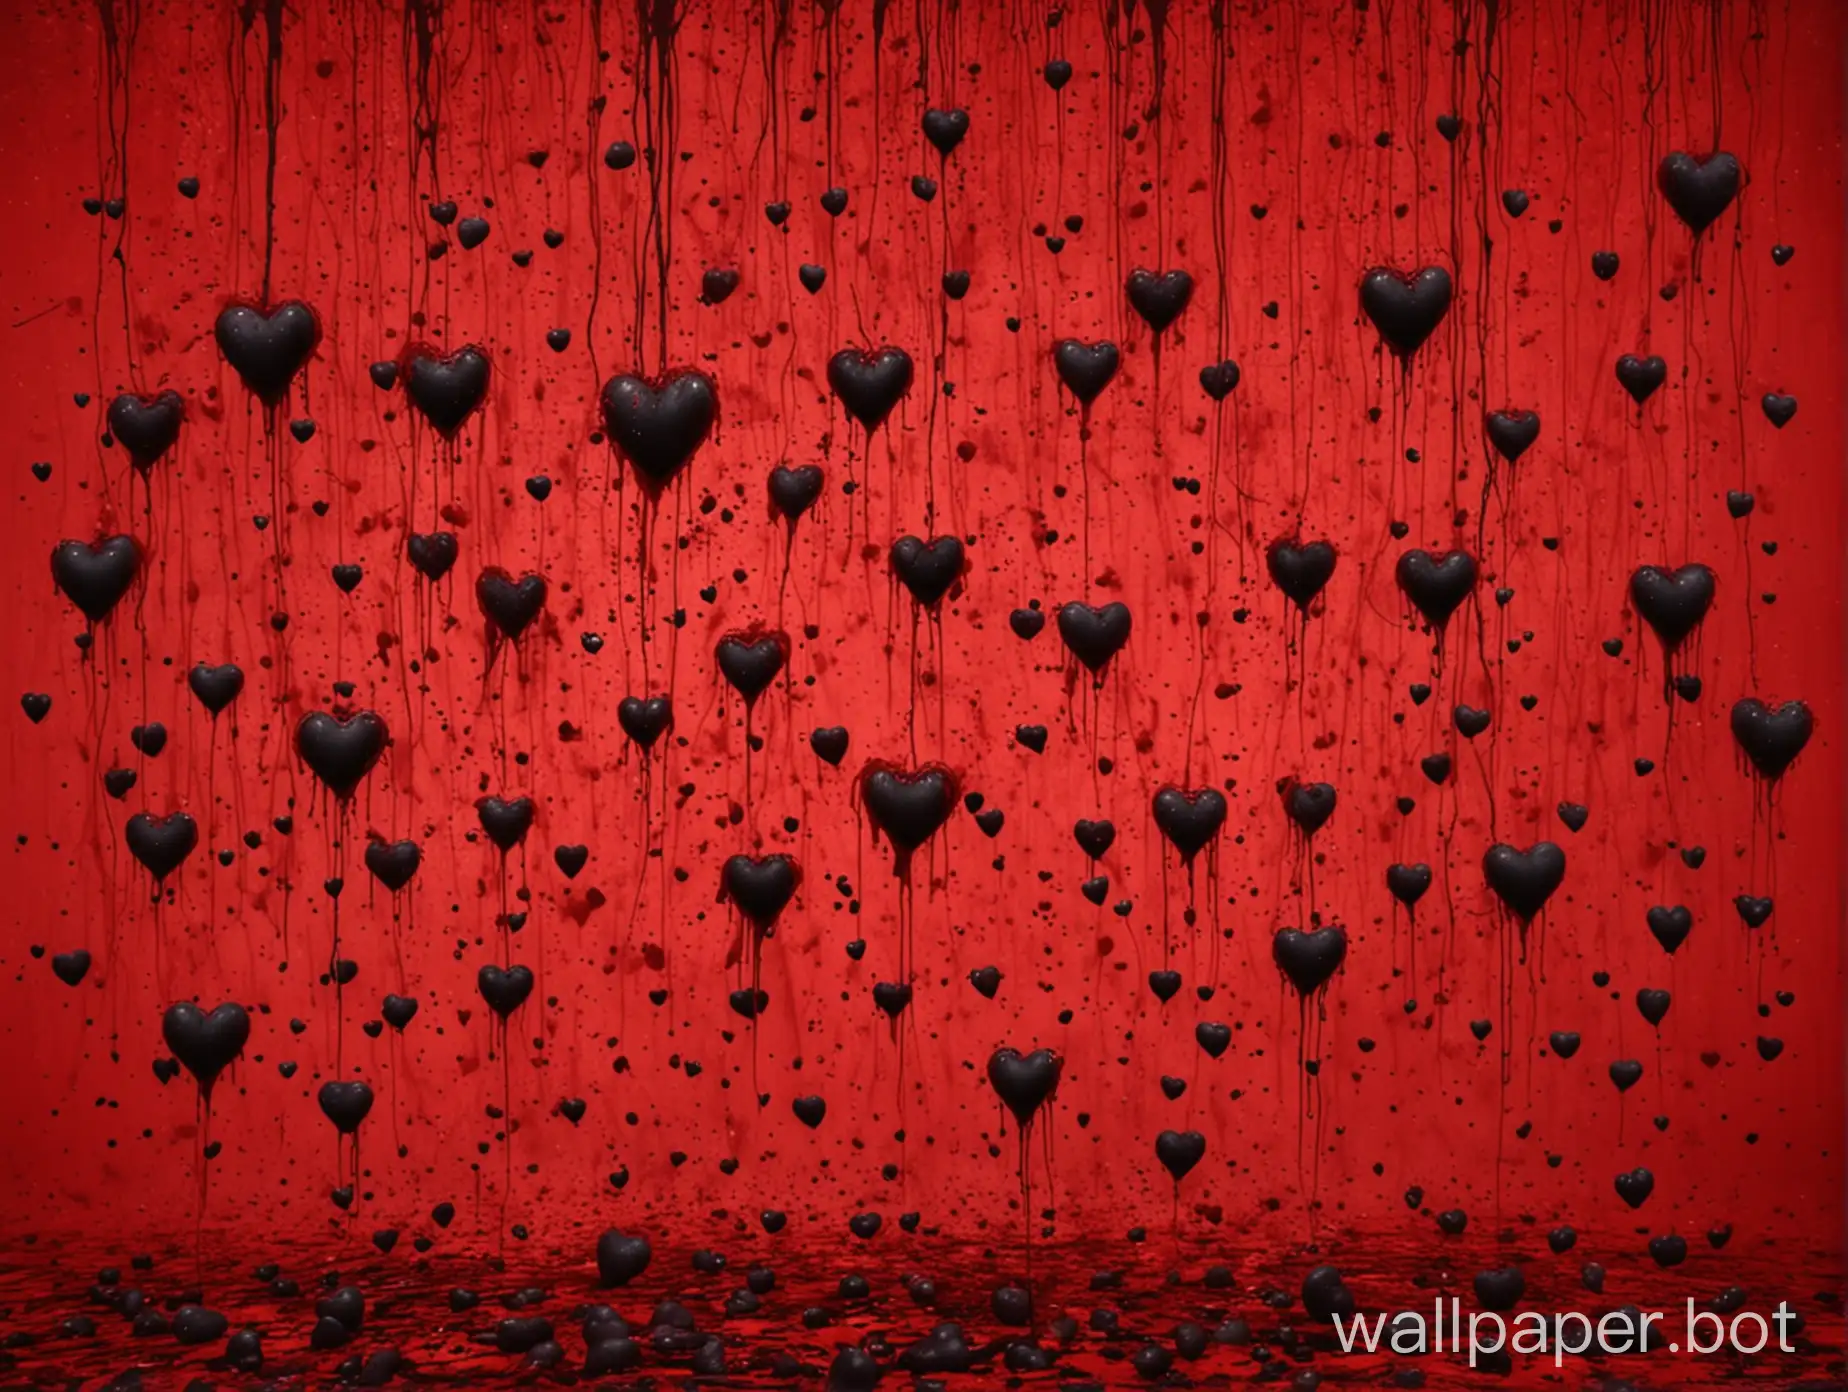 create a bloody red background with black hearts floating everywhere